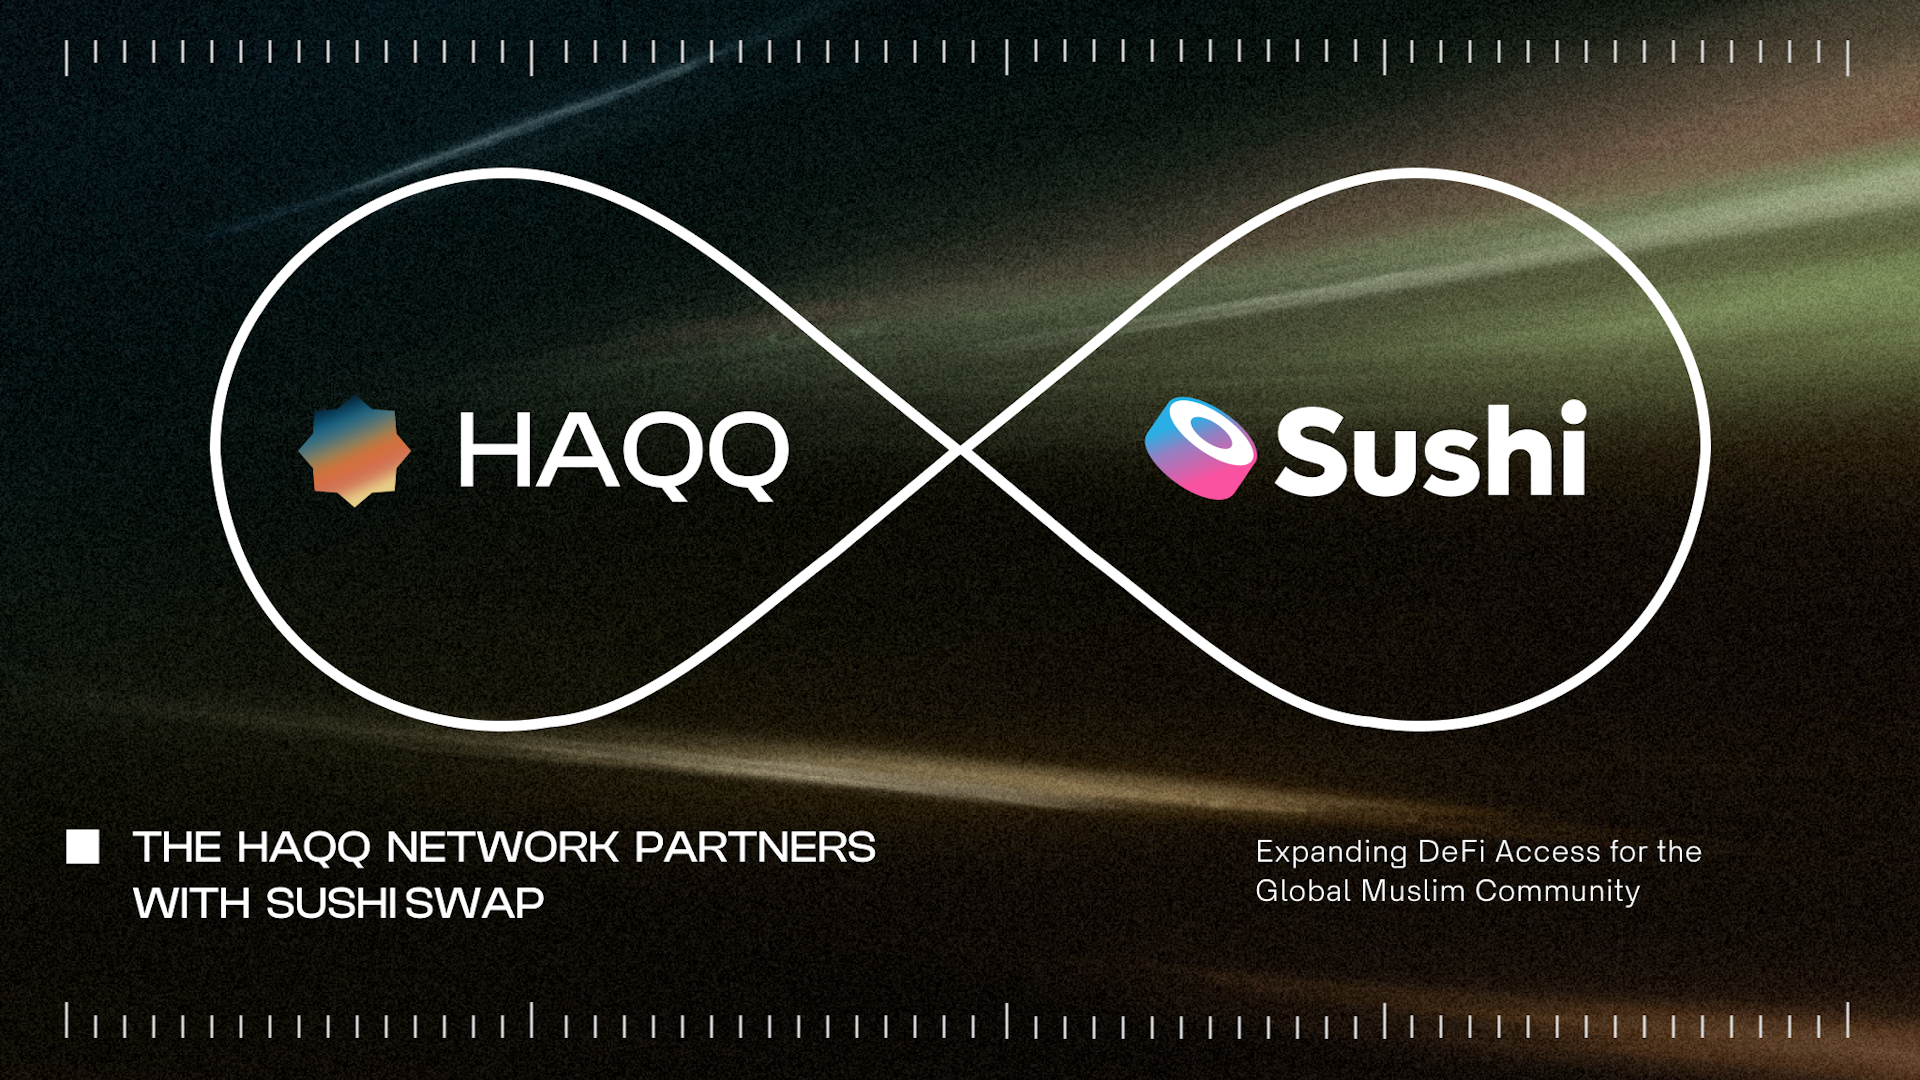 SUSHI and HAQQ: Expanding DeFi Access for the Global Muslim Community